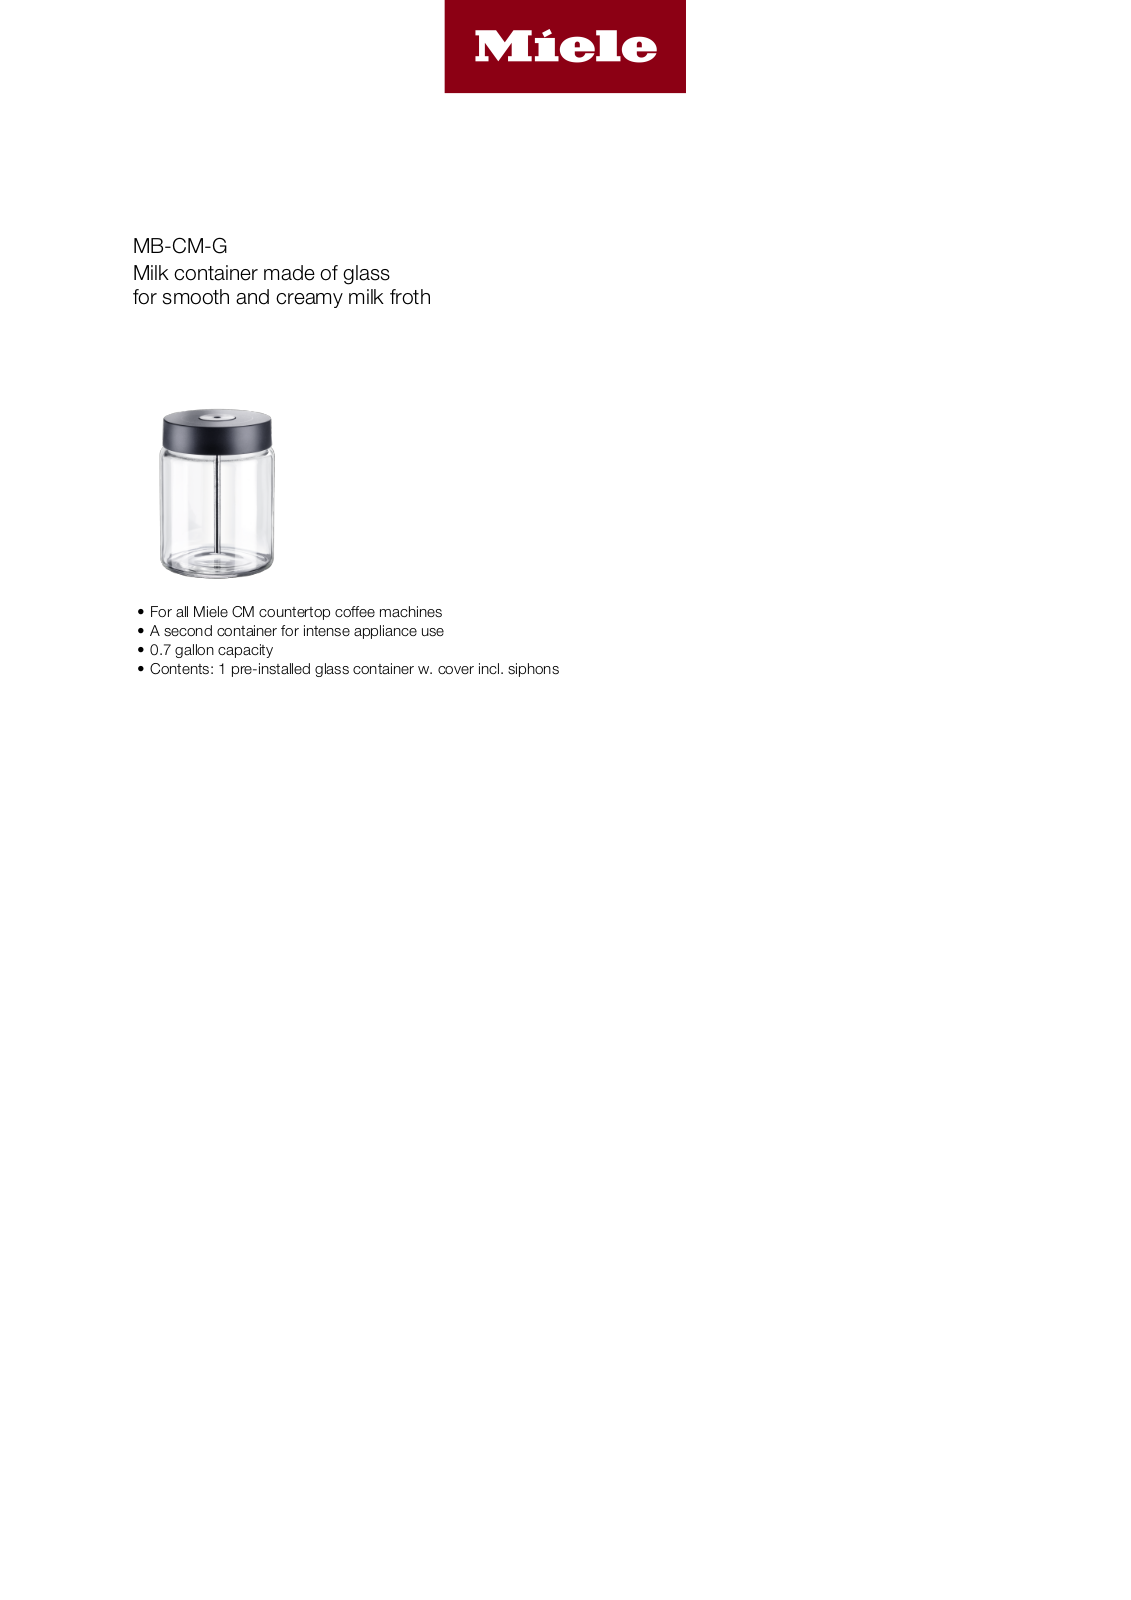 Miele MB-CM-G Specification Sheet